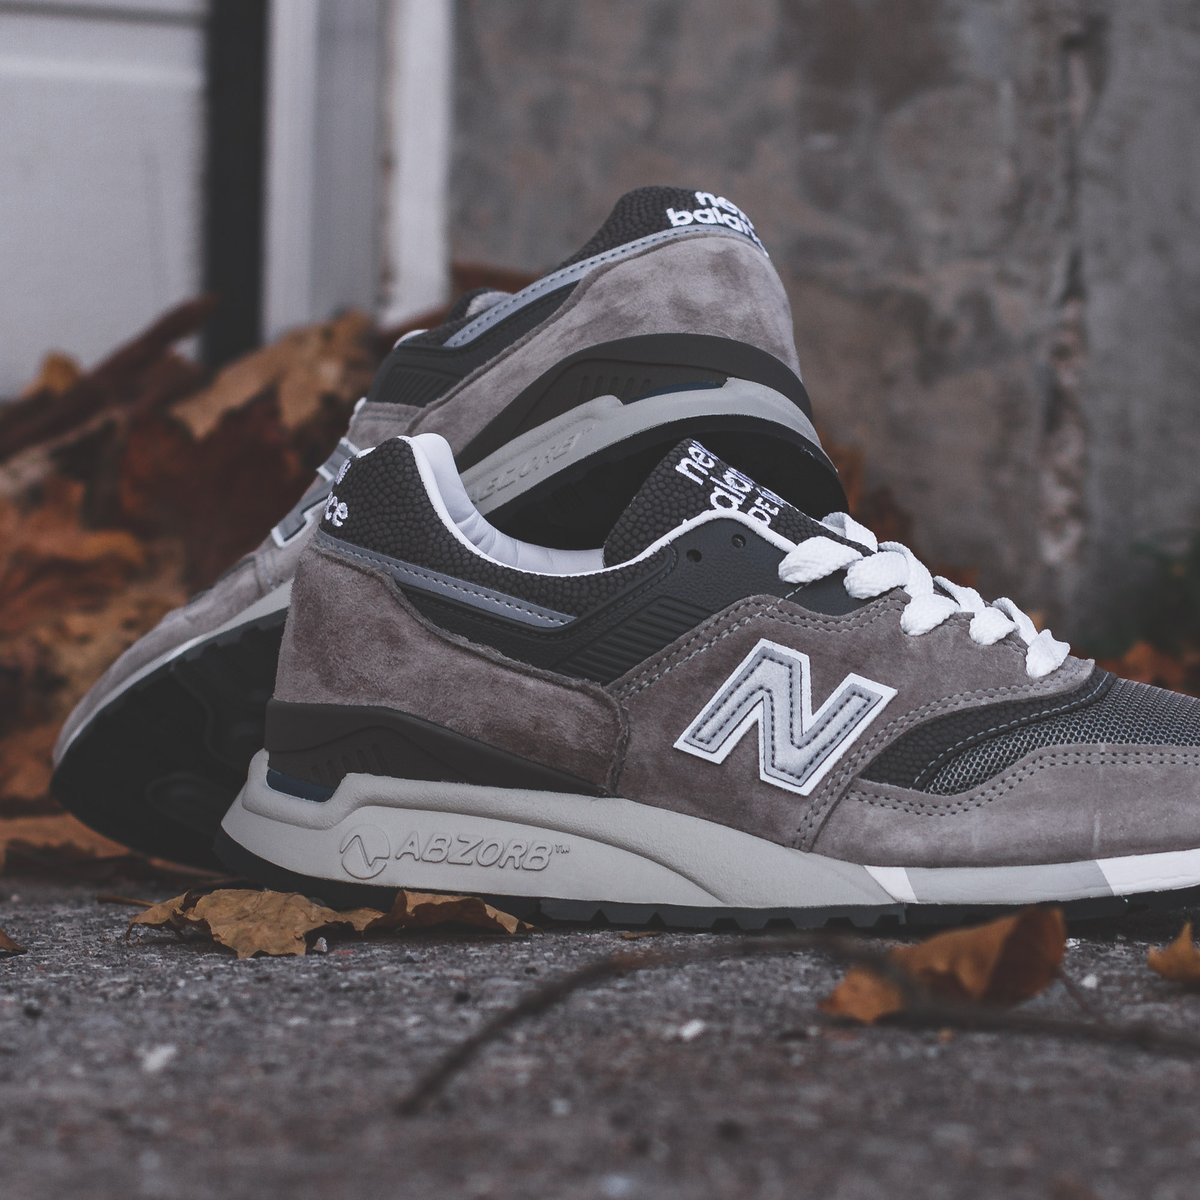 Giày New Balance 997.5 'Grey White' M9975Gr Authentic-Shoes